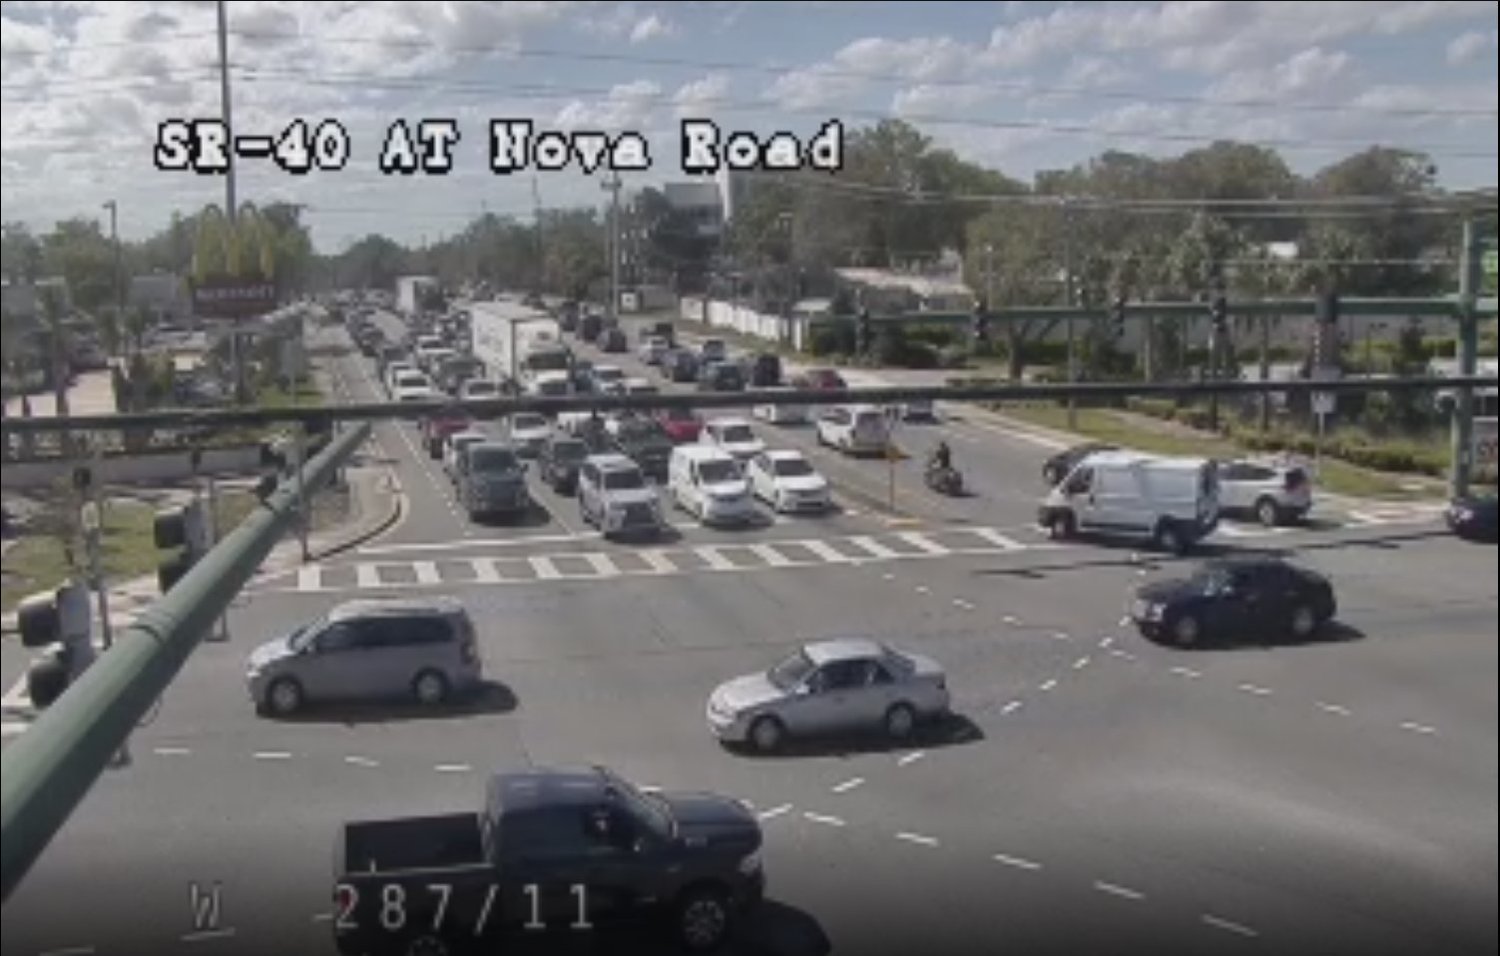 Traffic on Granada Blvd at Nova Road in Ormond. Traffic can be seen building on both sides of the roadway.